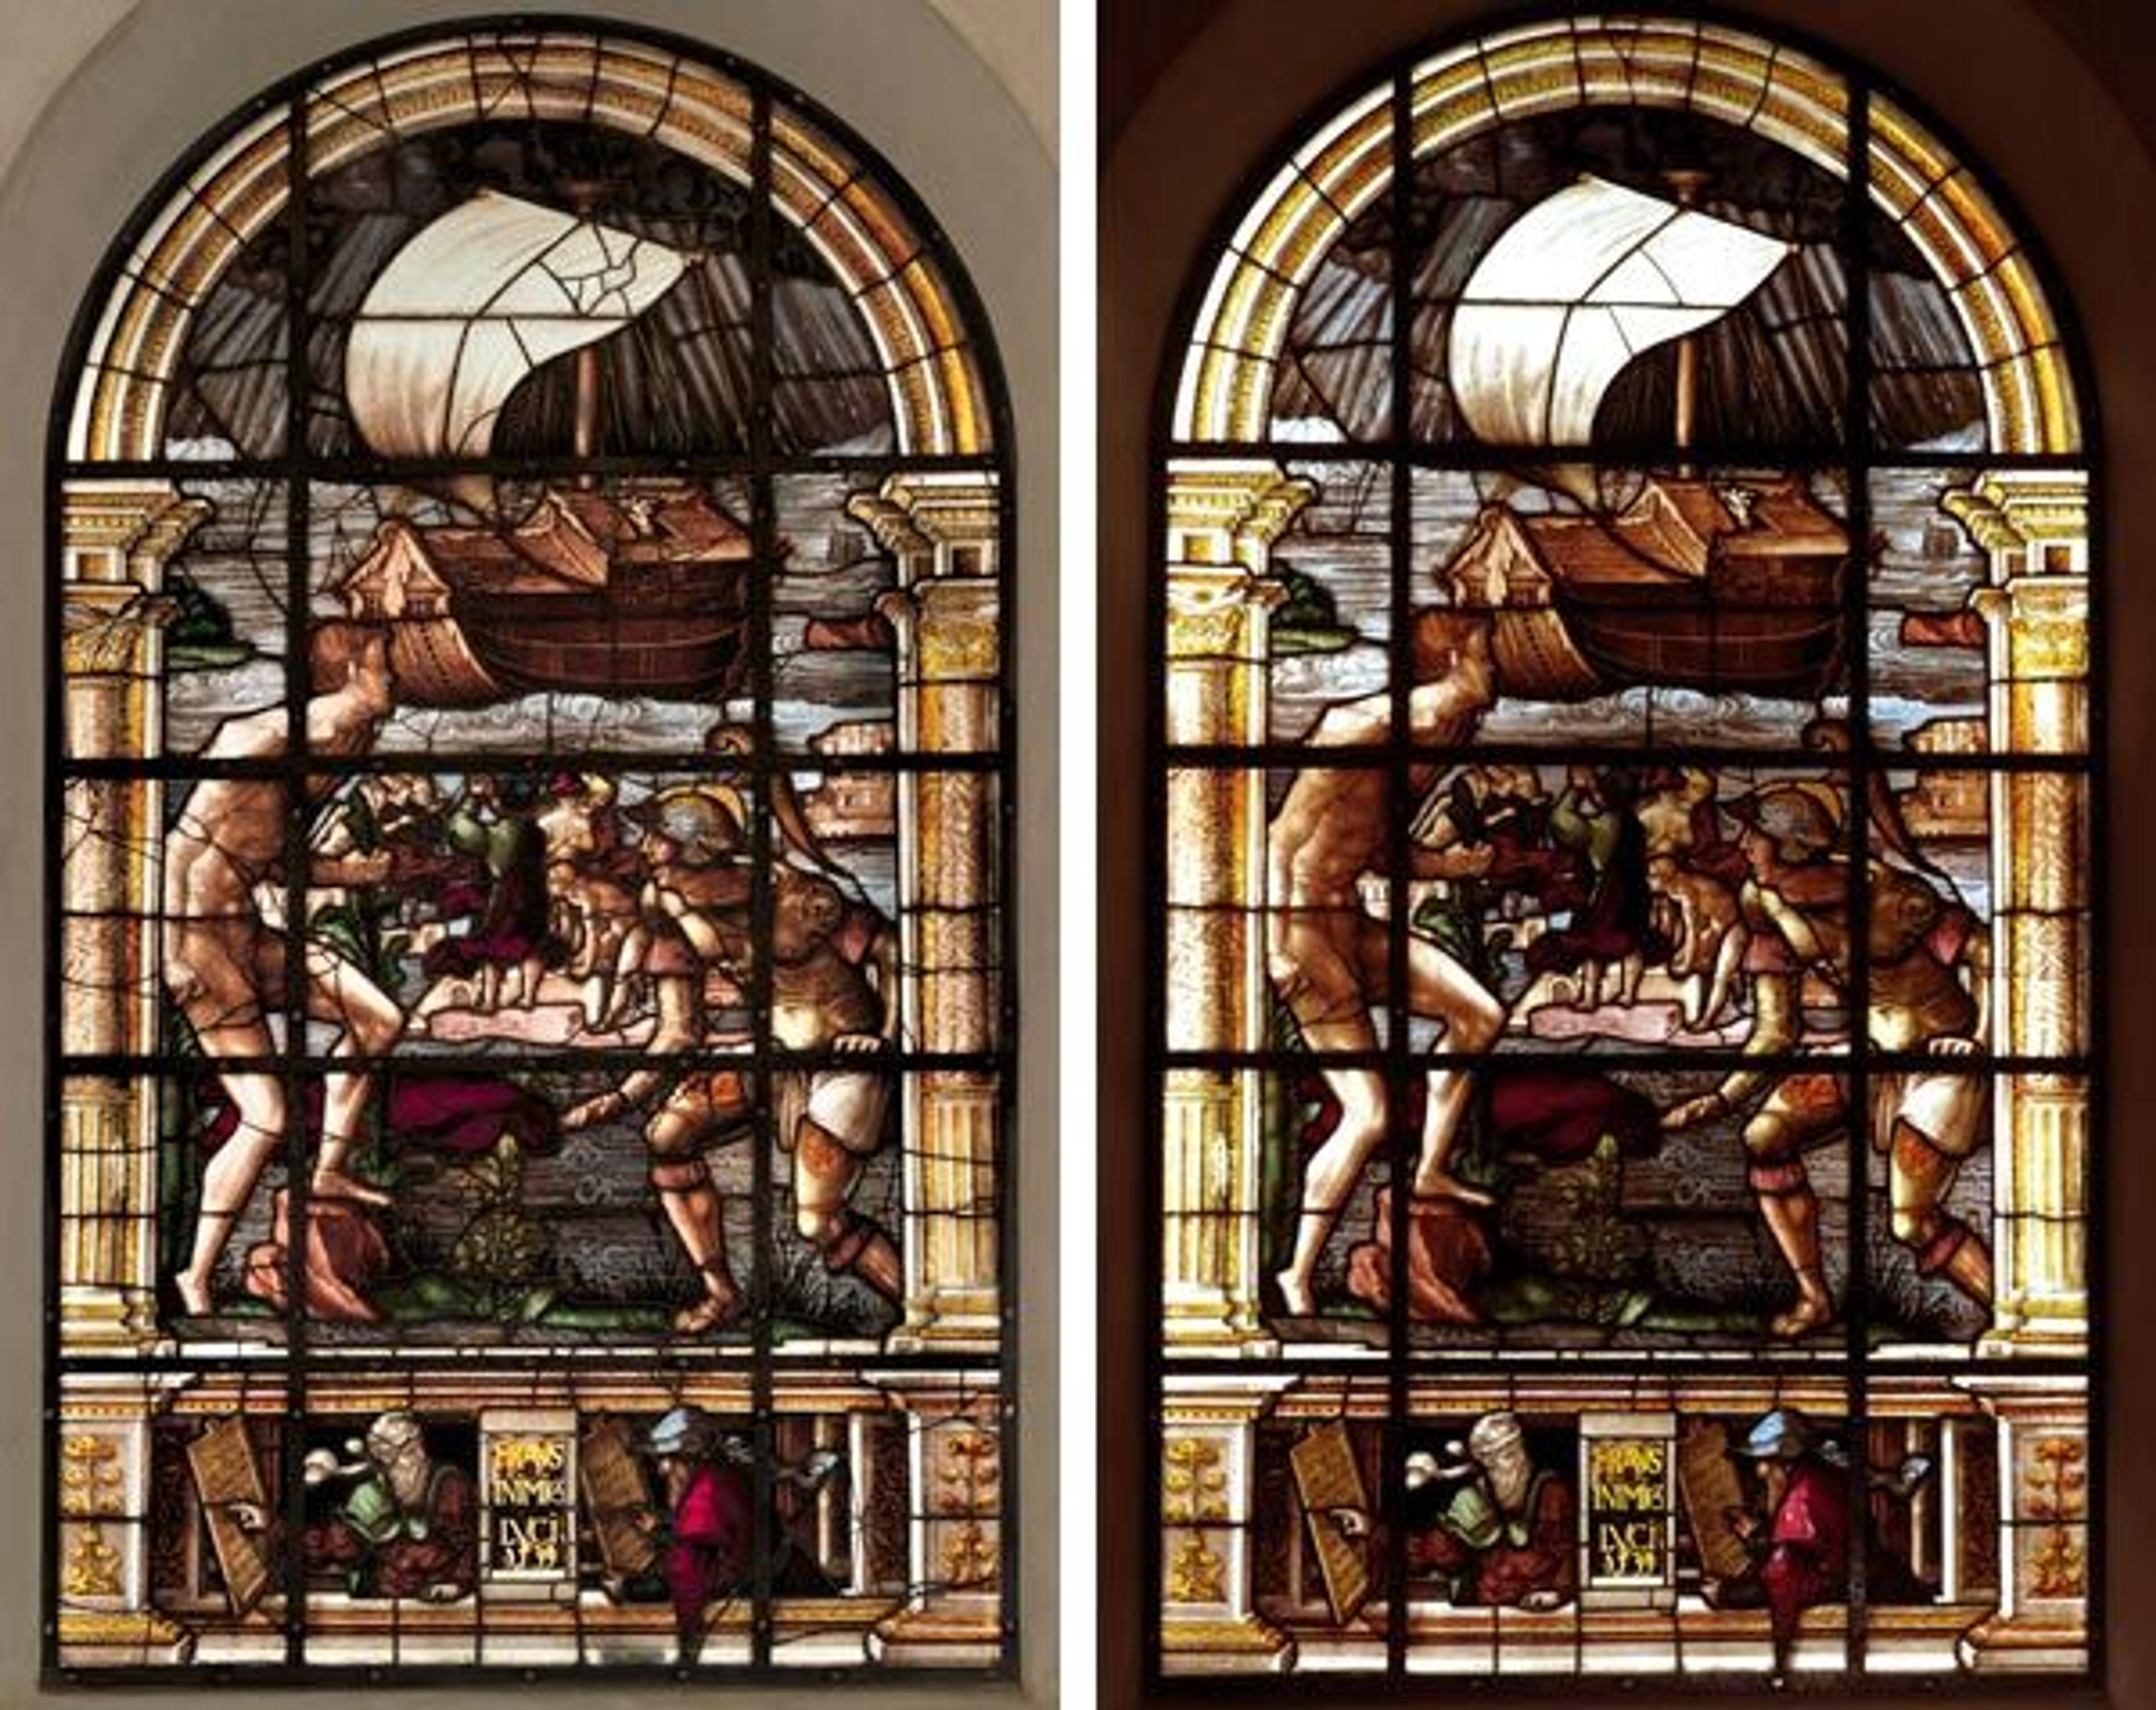 Left: Valentin Bousch (French, active 1514–41, died 1541). The Deluge (before treatment), 1531. Glass, painted and stained; Overall: H. 142 1/4 x W. 67 in. (361.3 x 170.2 cm). The Metropolitan Museum of Art, New York, Purchase, Joseph Pulitzer Bequest, 1917 (17.40.2a–r). Right: The Deluge, after treatment. Image courtesy of the authors